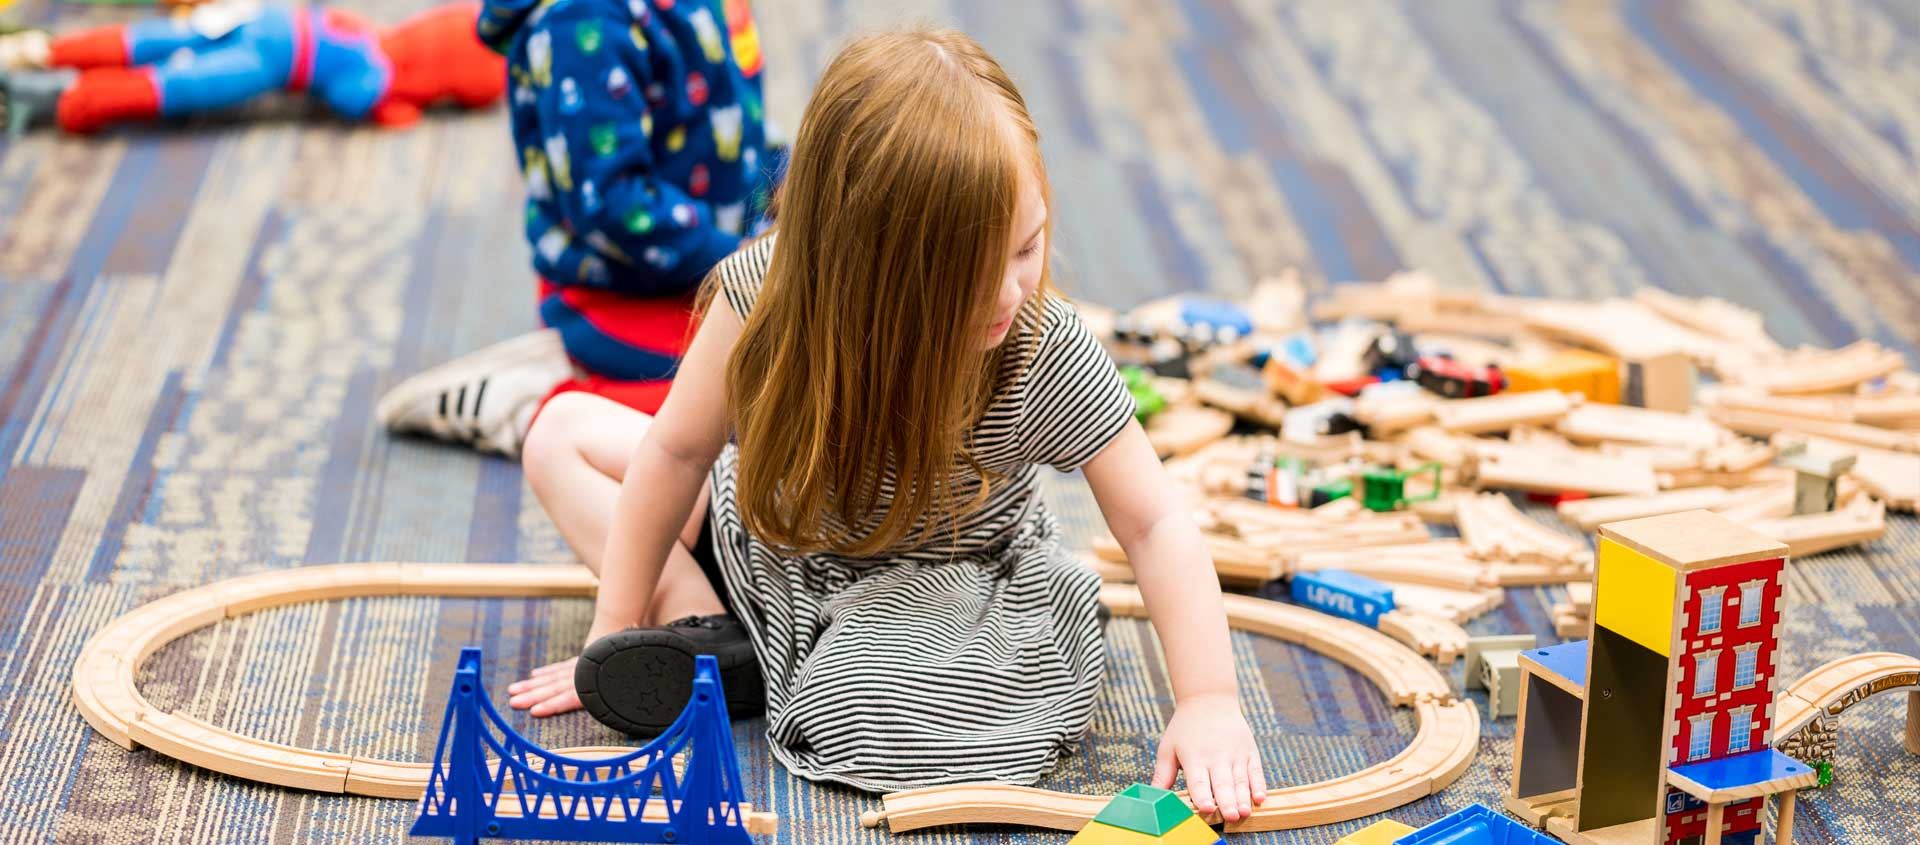 A preschool-aged girl plays with trains while another child sits near her